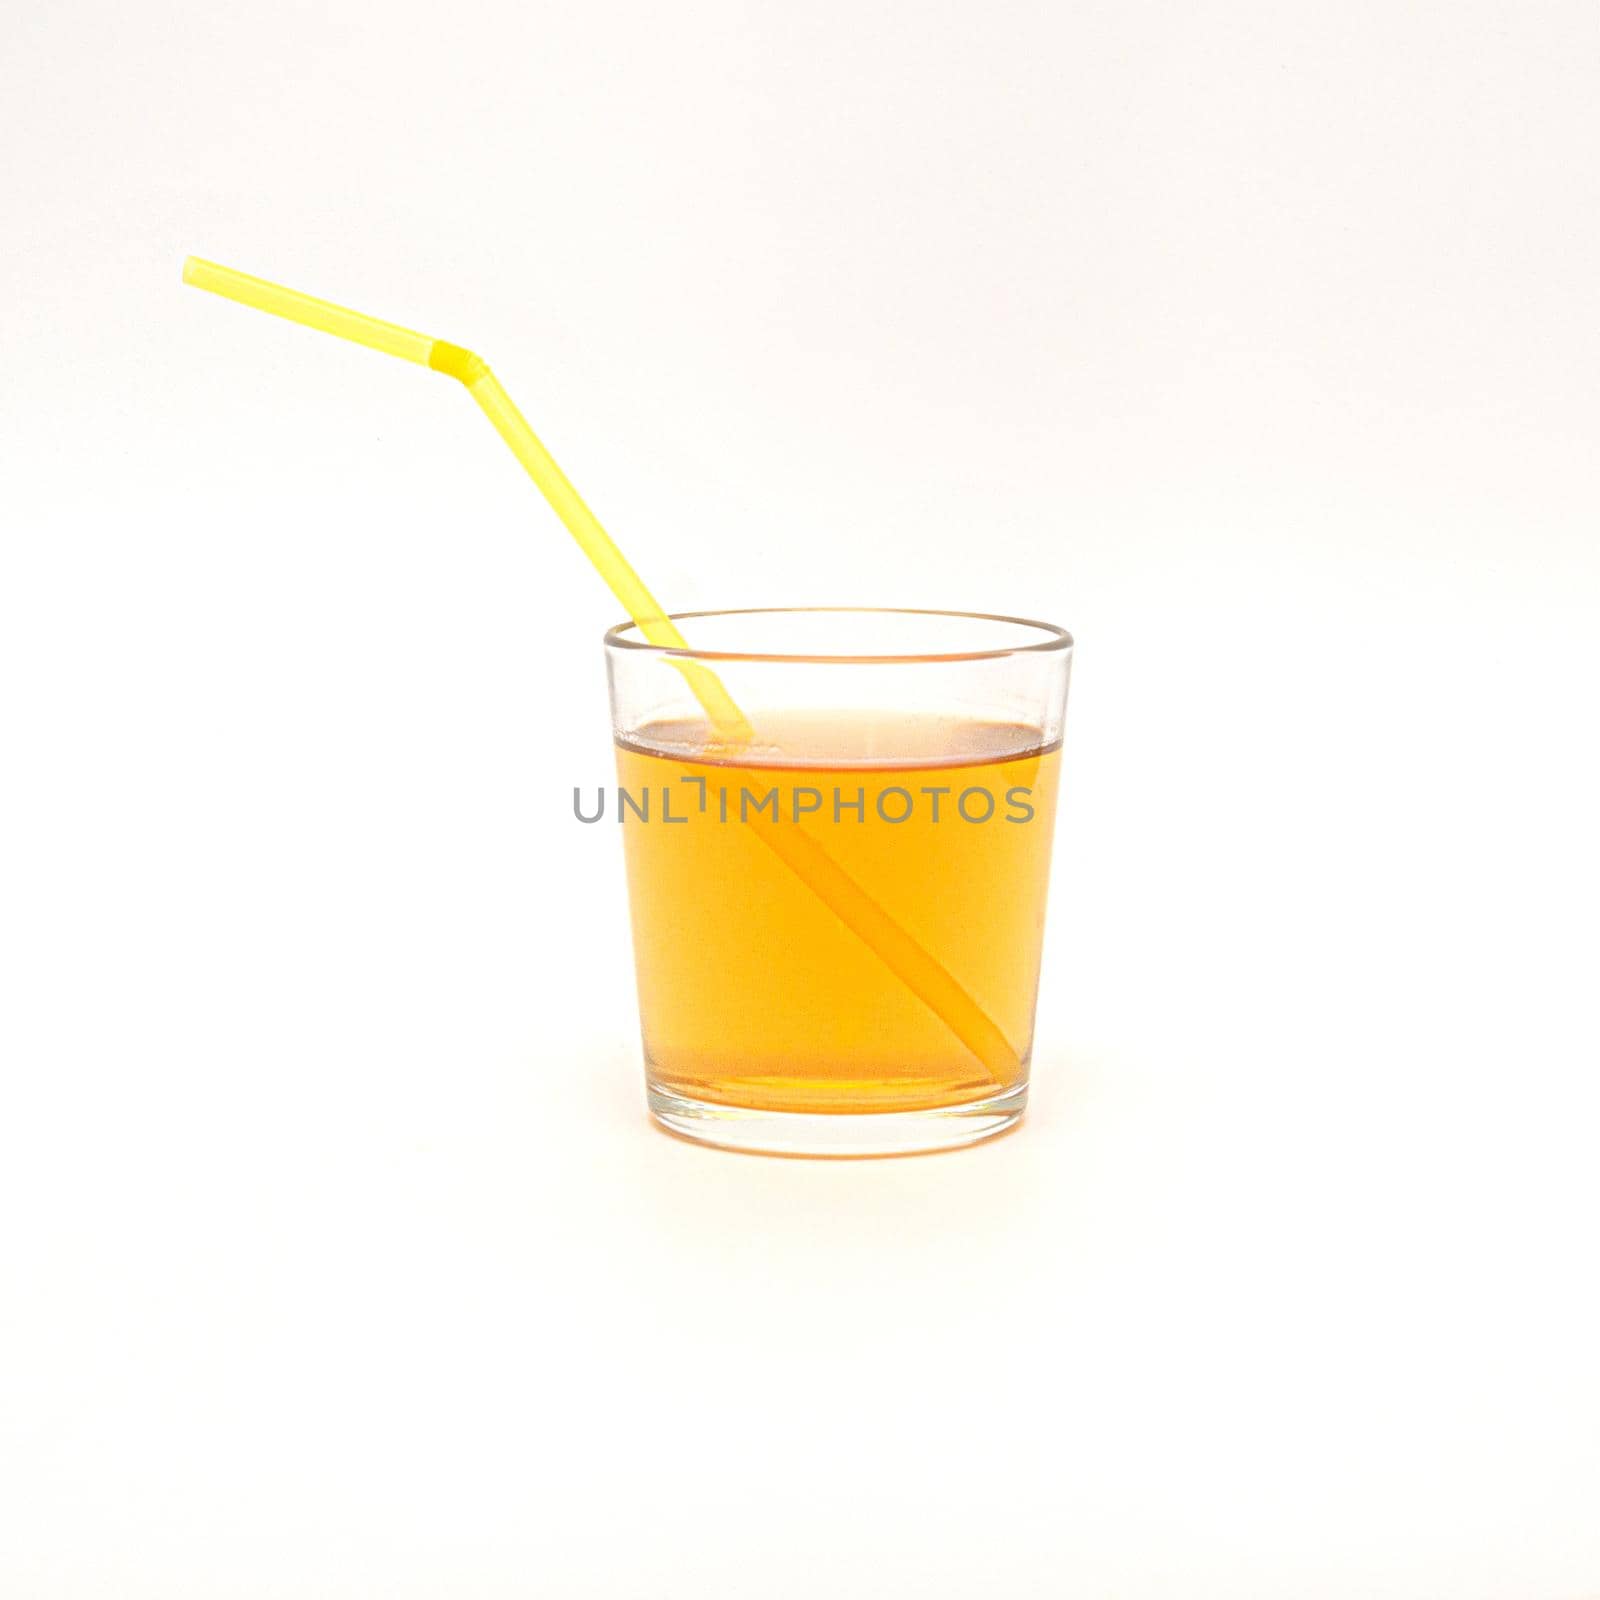 a glass of apple juice with a straw isolated on a white background by andre_dechapelle